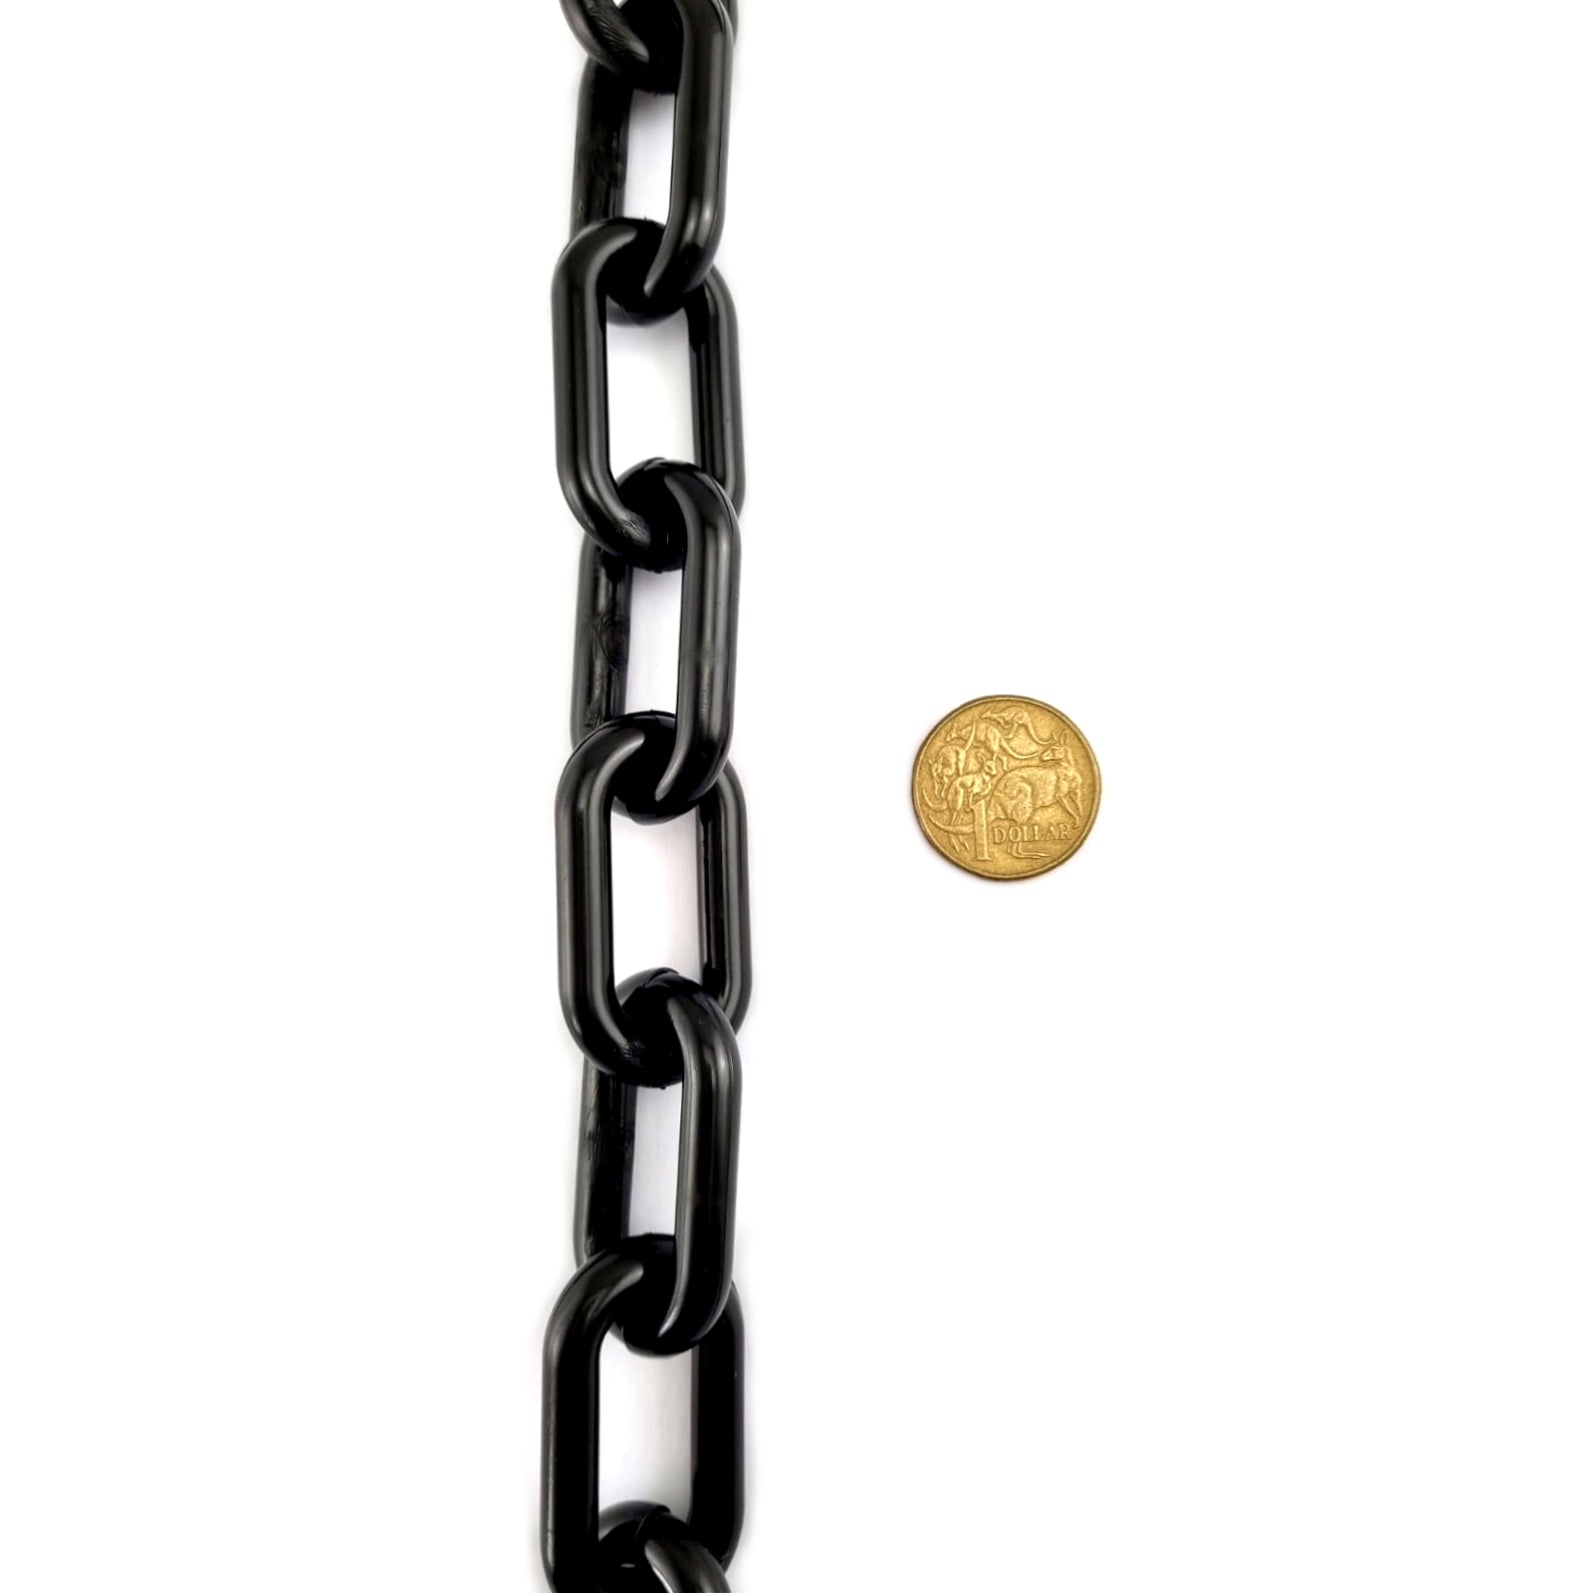 Plastic Chain Black. Size: 8mm. Order by the metre. Australia wide delivery.